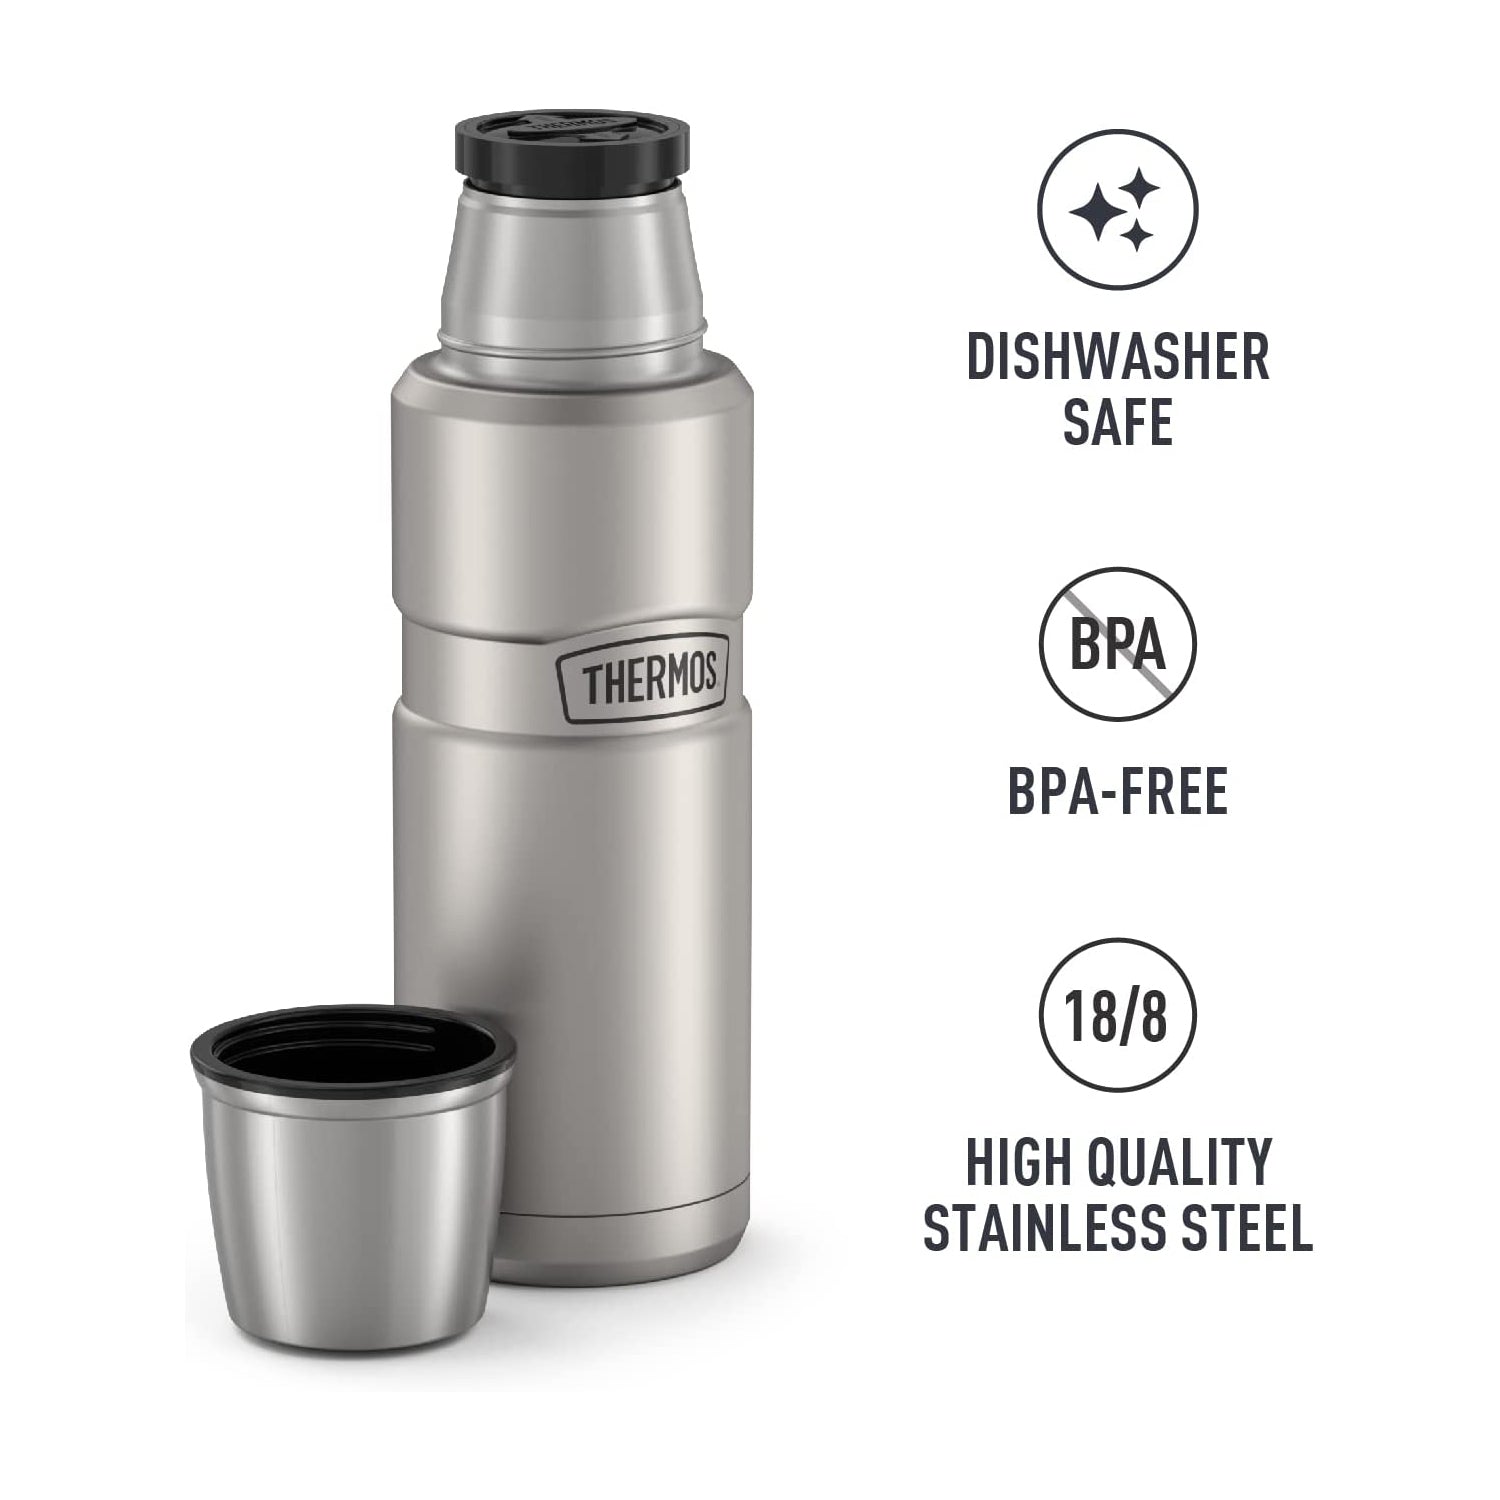 Thermos Stainless King 16 Ounce Compact Bottle - Stainless Steel